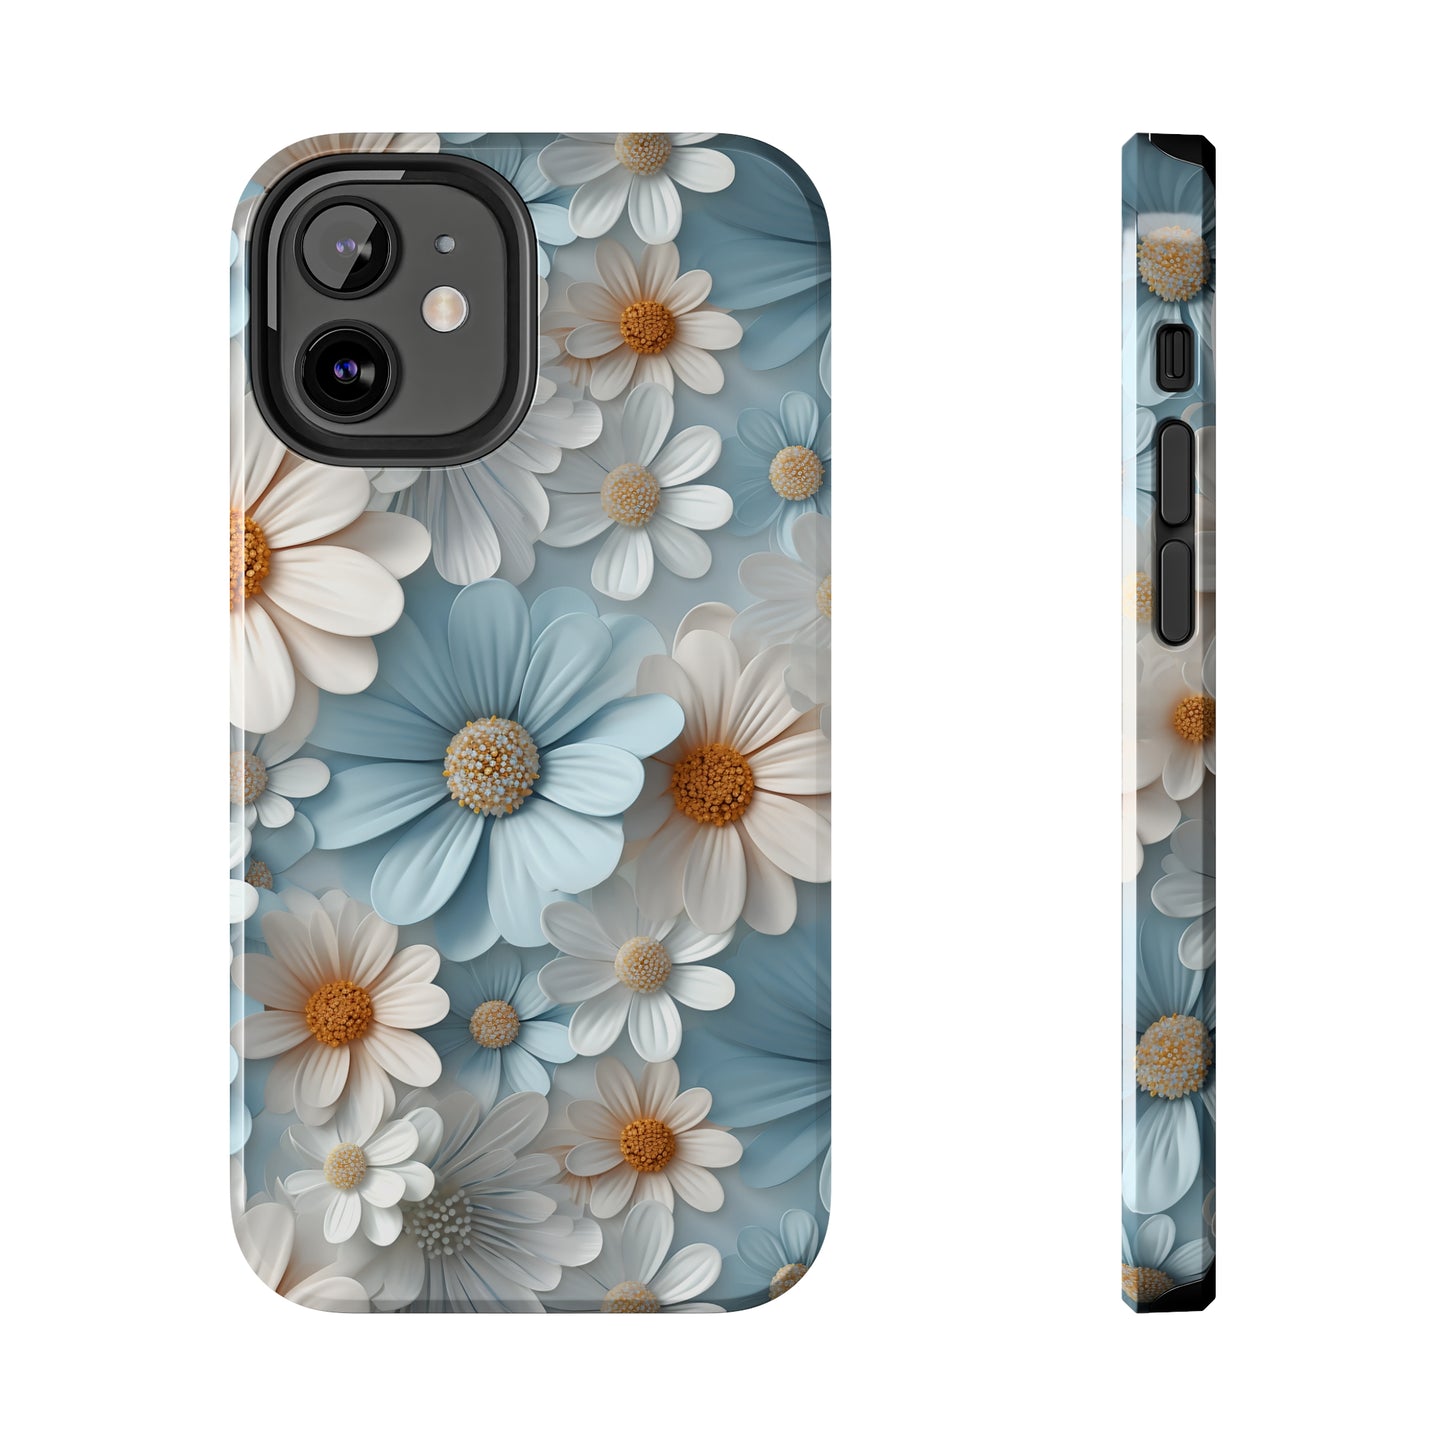 3D Daisy Digital print Design Tough Phone Case compatible with a large variety of iPhone models, Gift, Phone Case